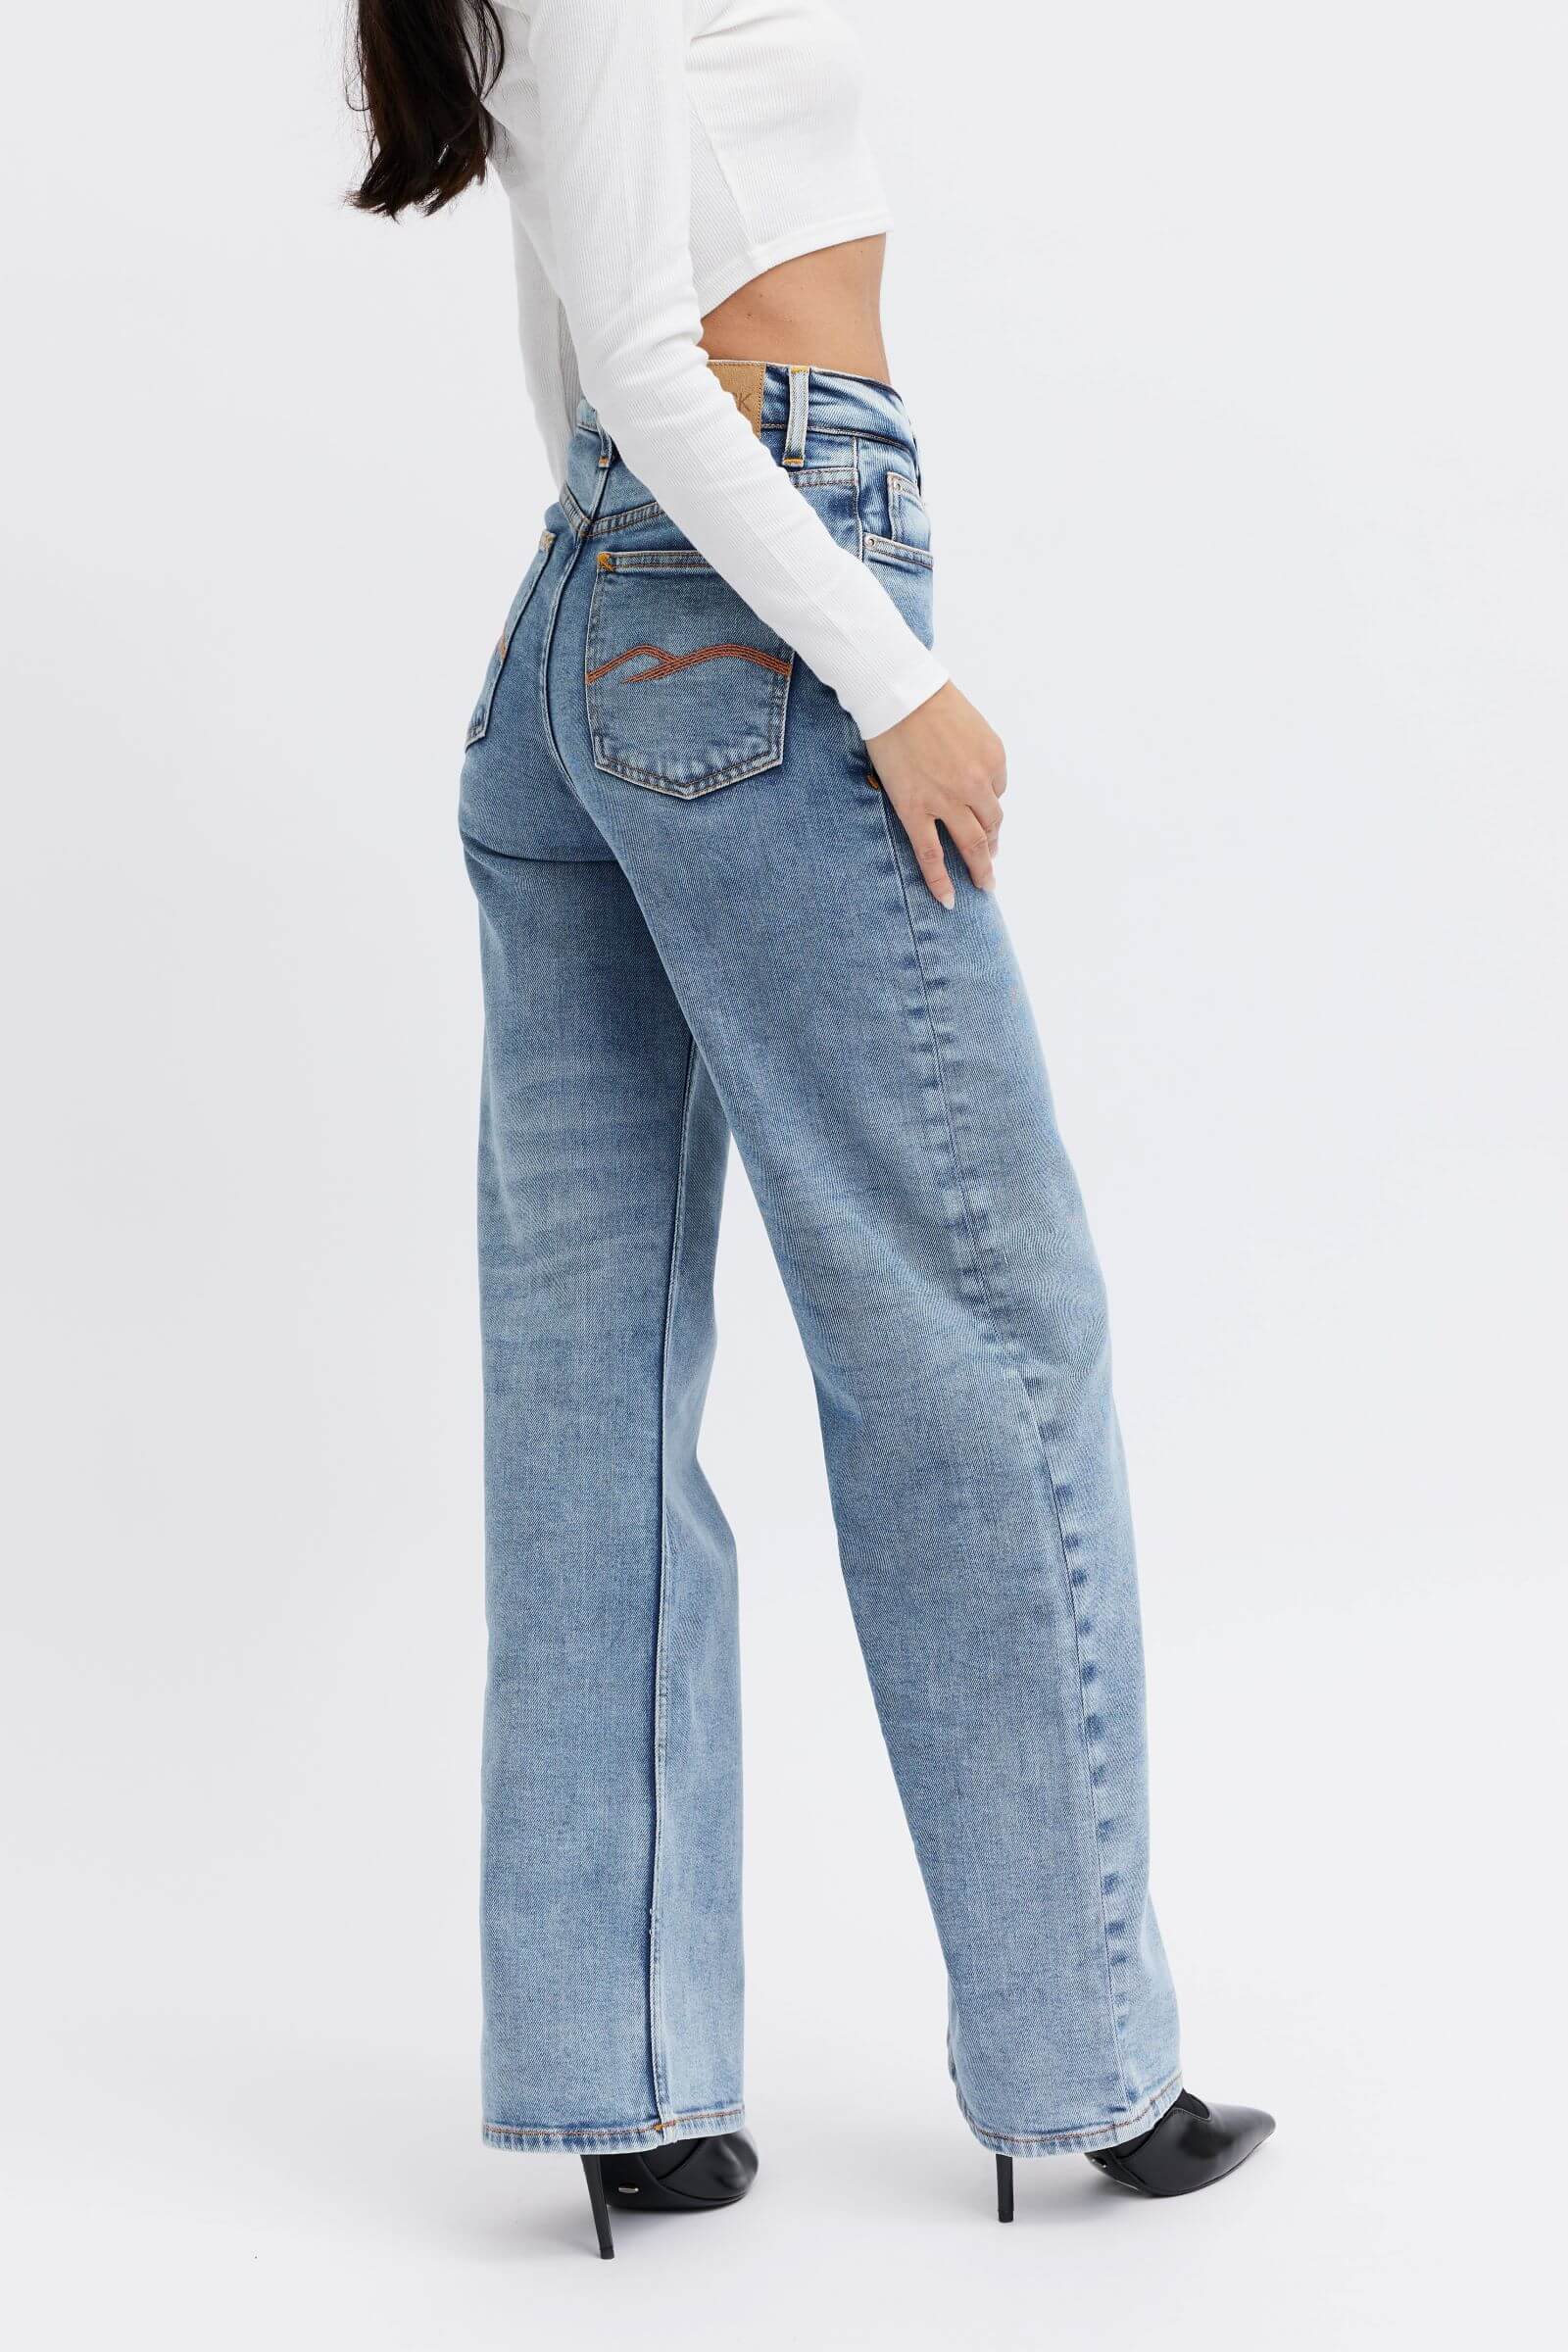 comfy style ethical jeans 